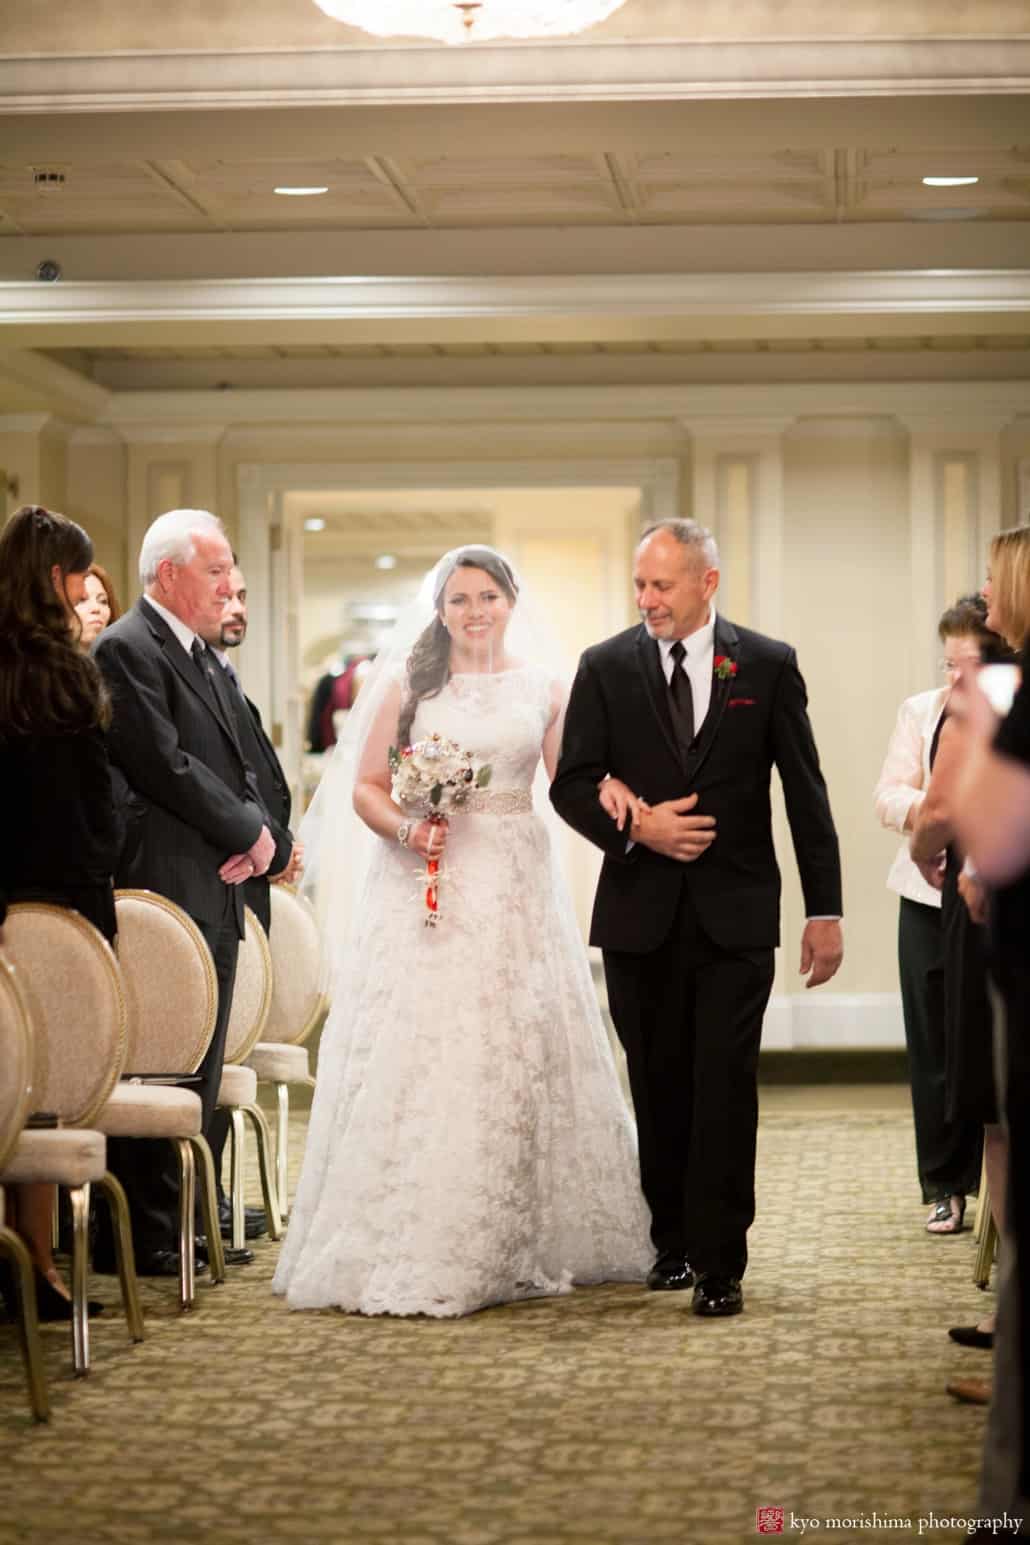 Father and bride walk down the aisle at Olde Mill Inn Christmas wedding, photographed by Kyo Morishima